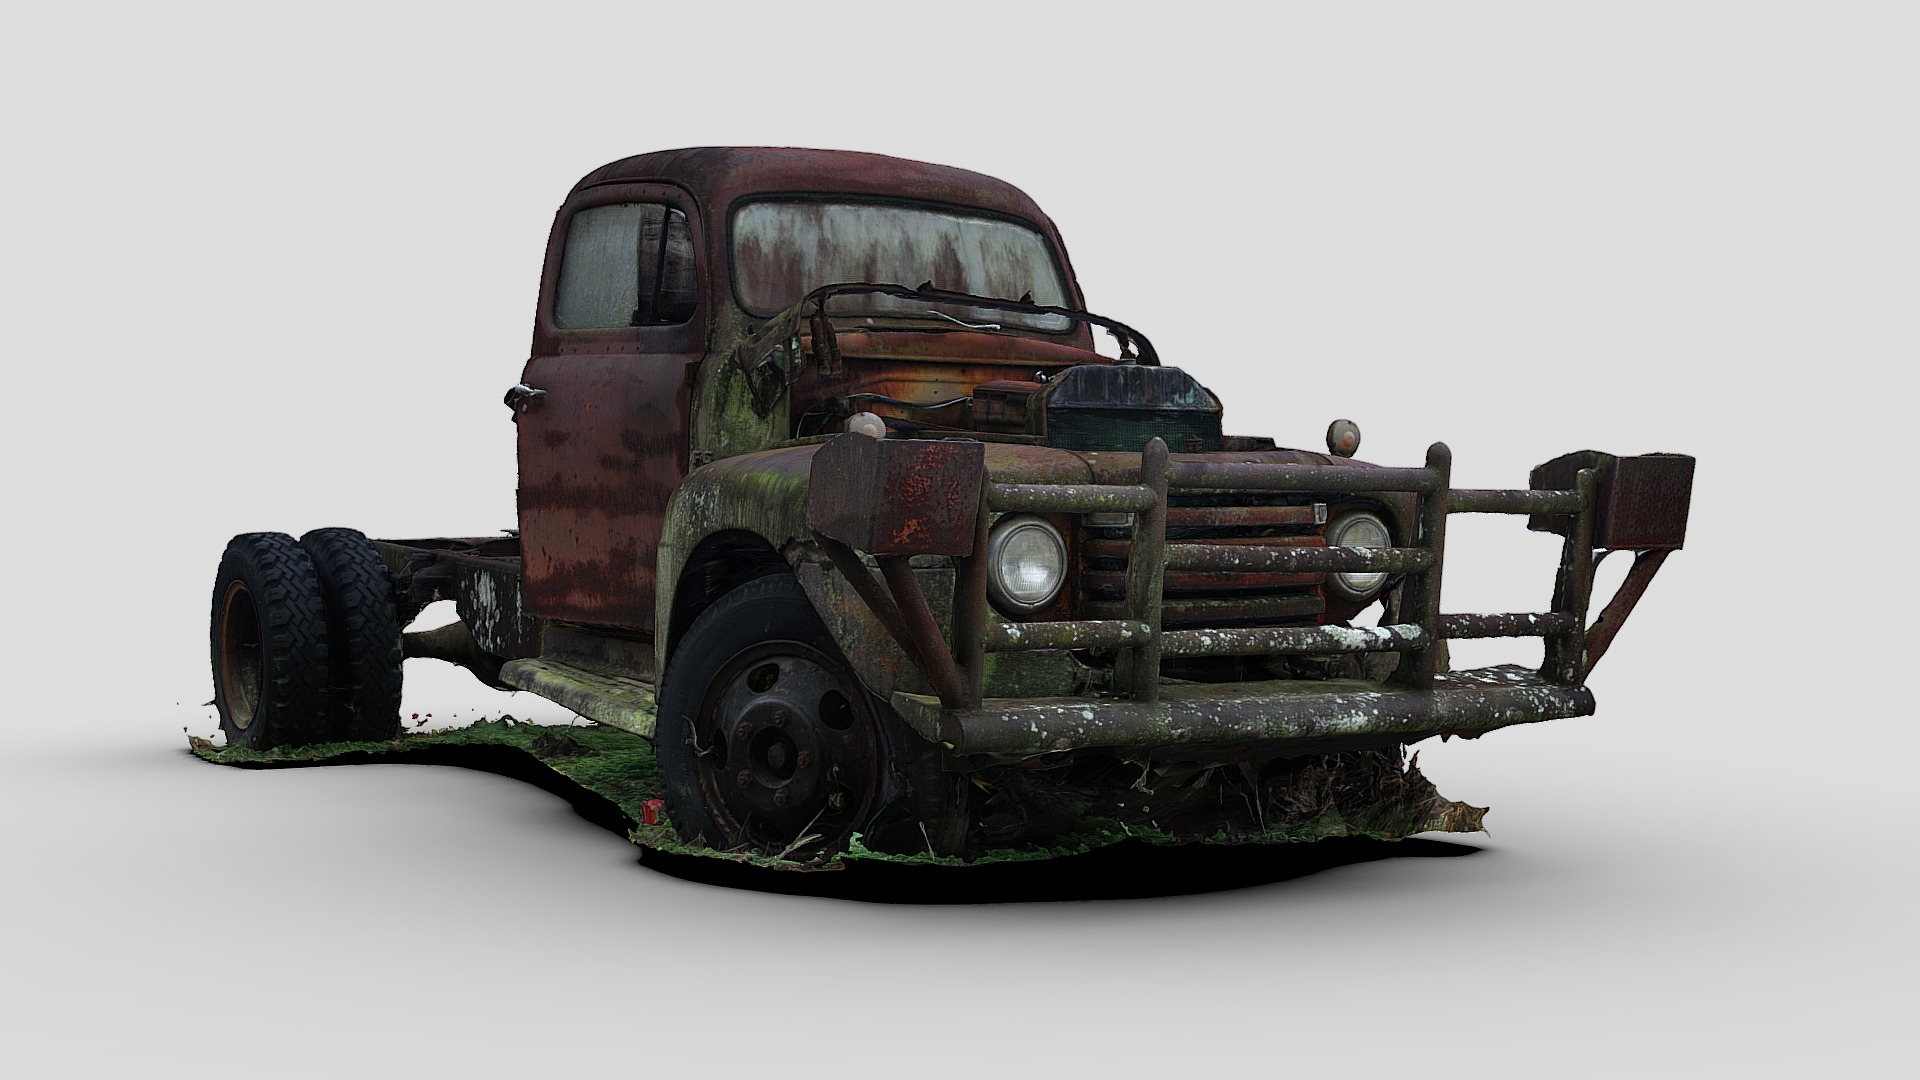 3D model Mossy Truck (Raw Scan) - This is a 3D model of the Mossy Truck (Raw Scan). The 3D model is about a toy truck on a white background.